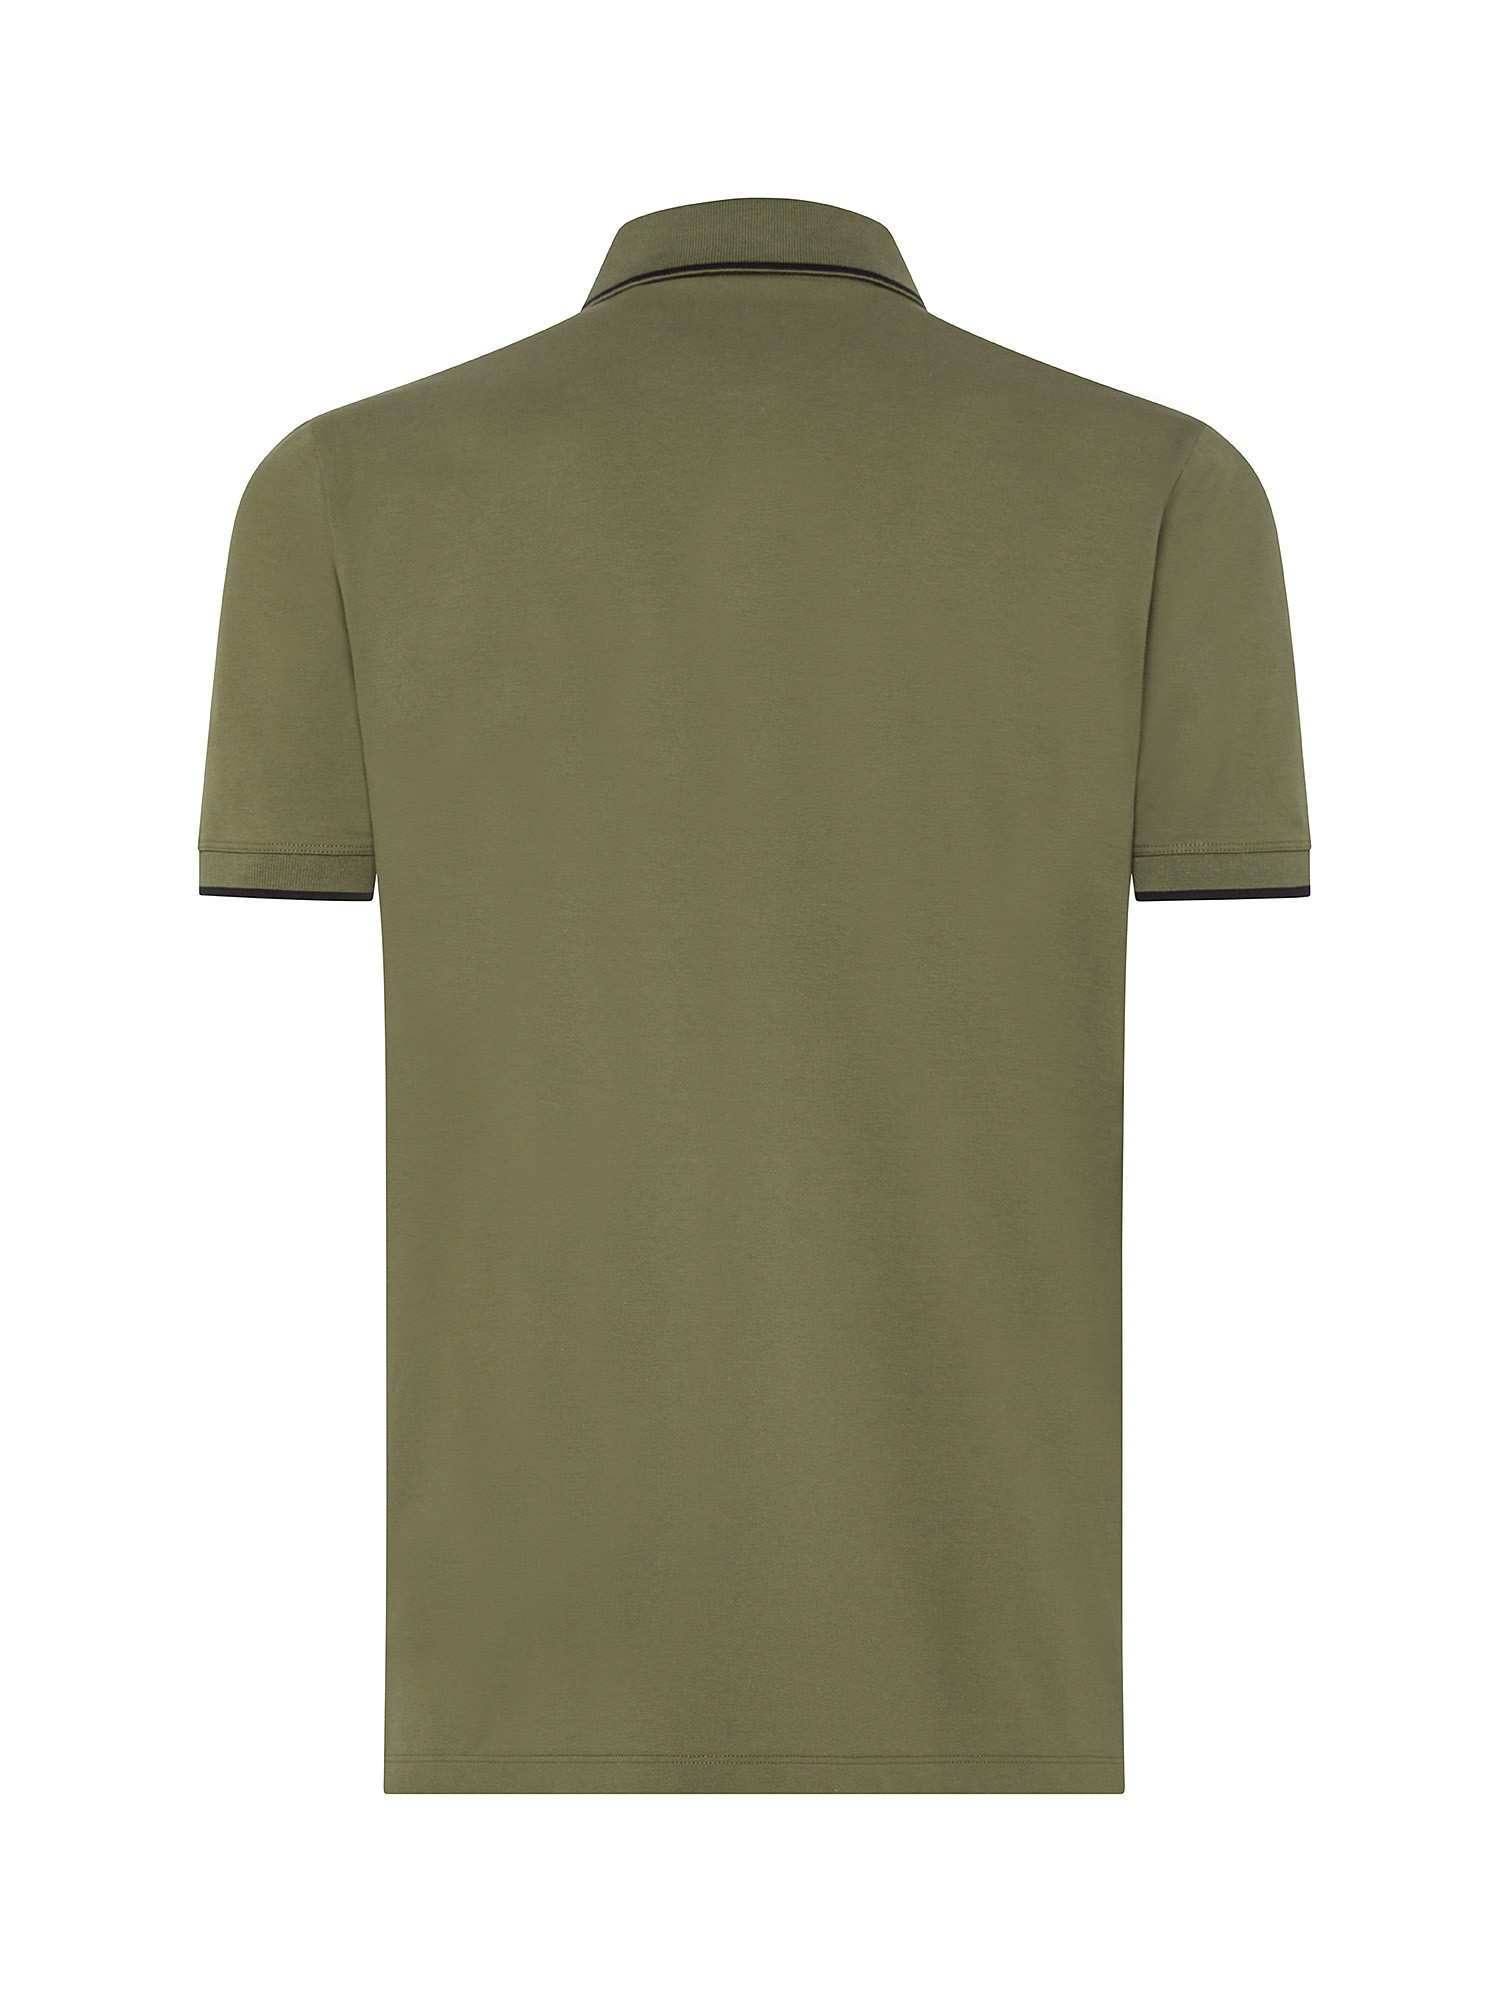 Hugo - Polo slim fit con logo in cotone, Verde, large image number 1